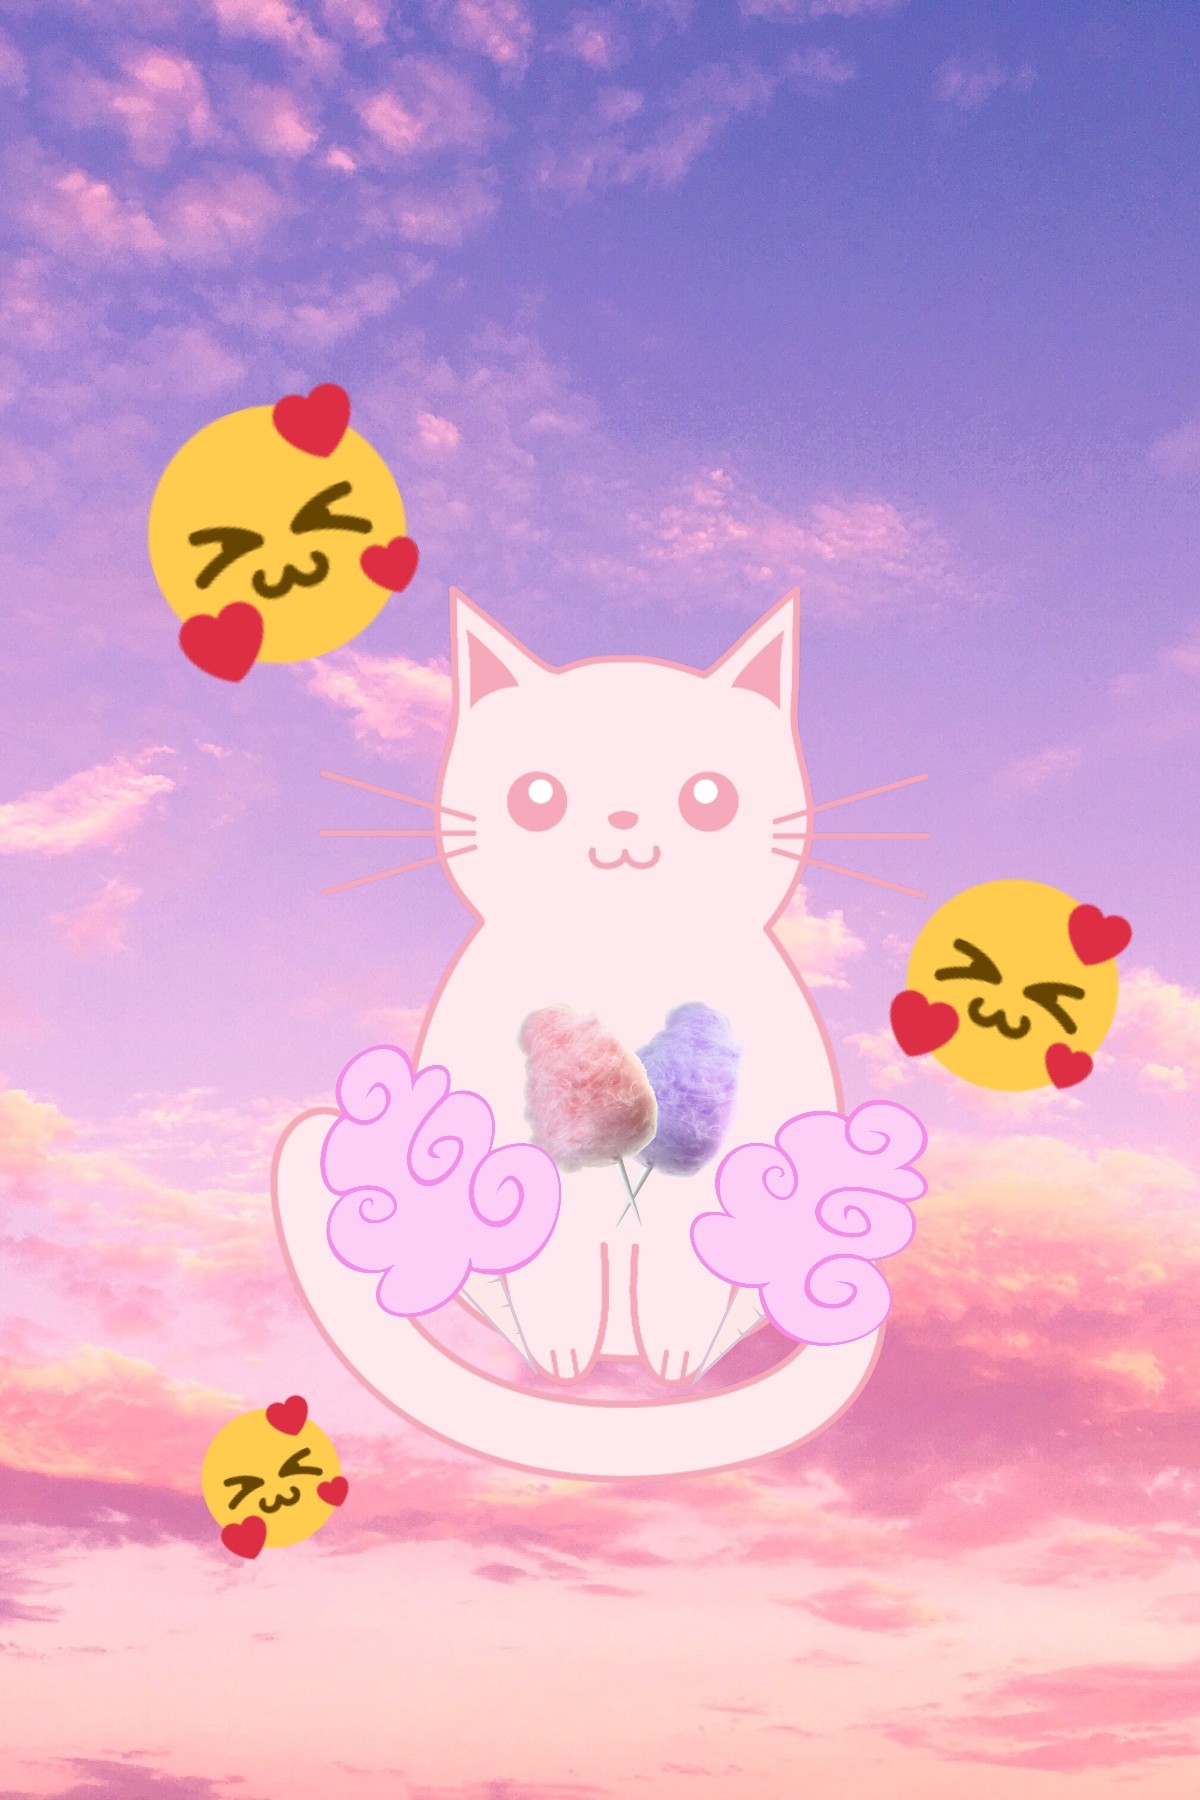 Cotton candy cat
Do what makes you feel happy